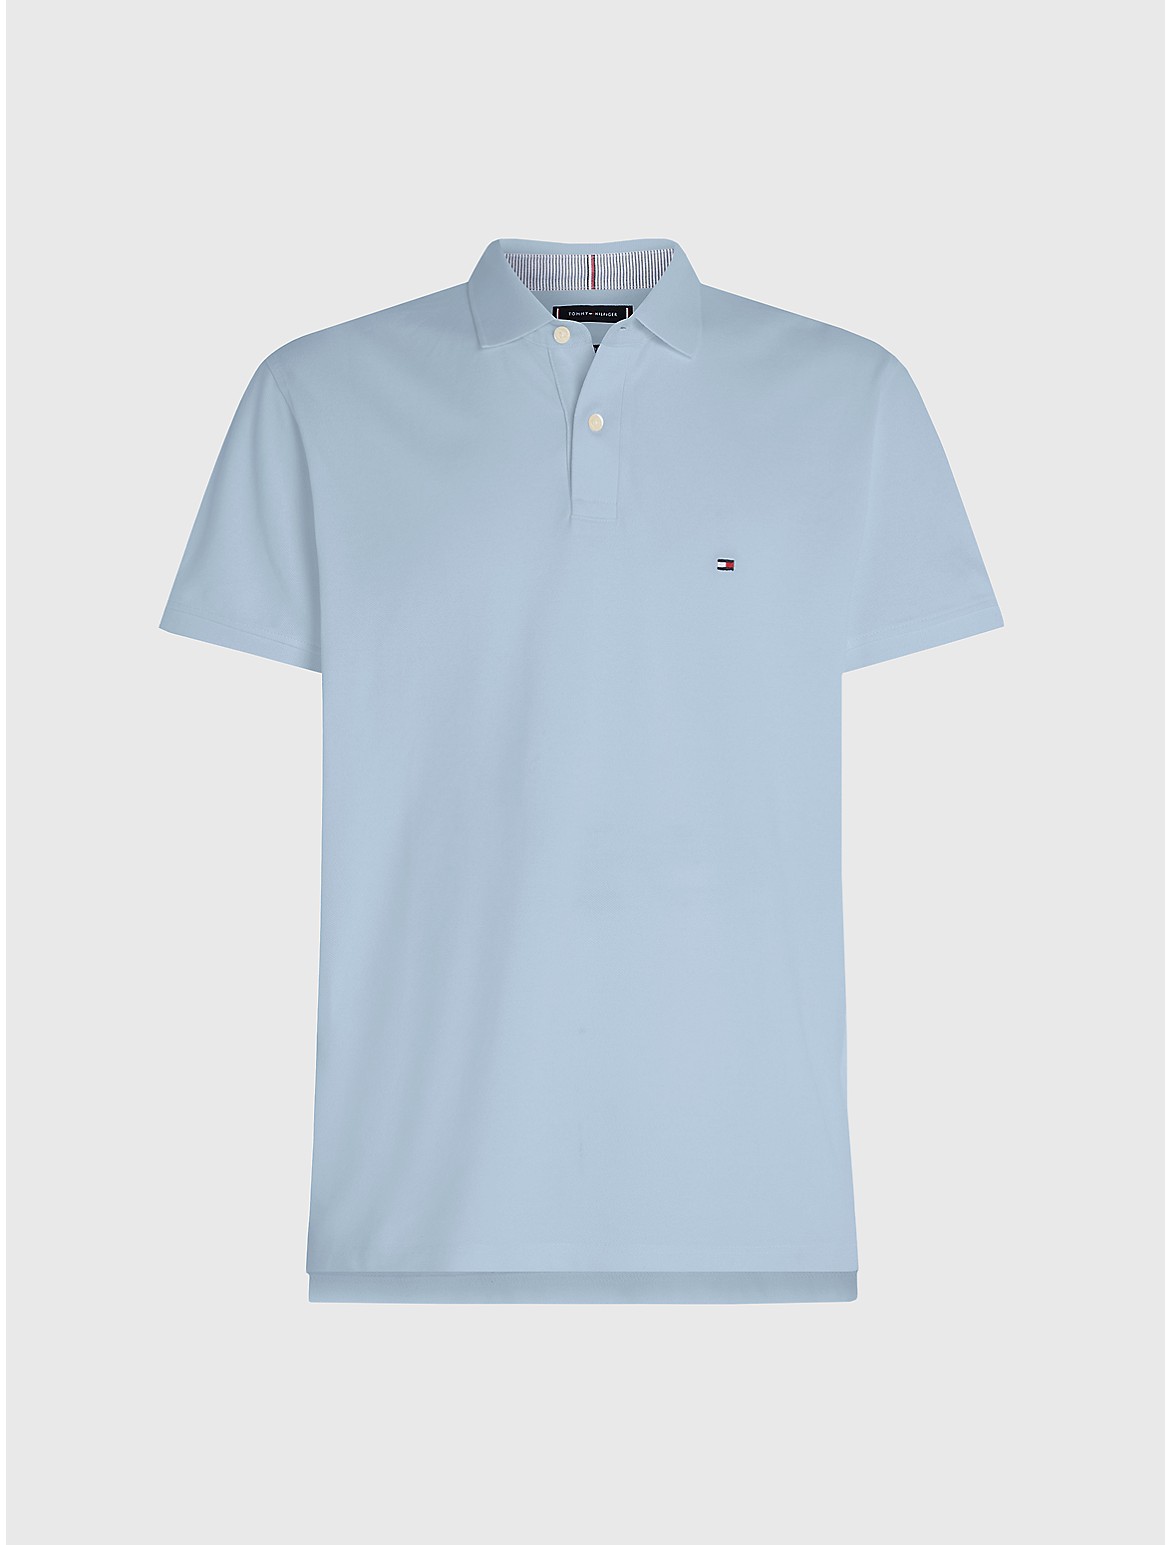 TOMMY HILFIGER CLASSIC FIT 1985 POLO